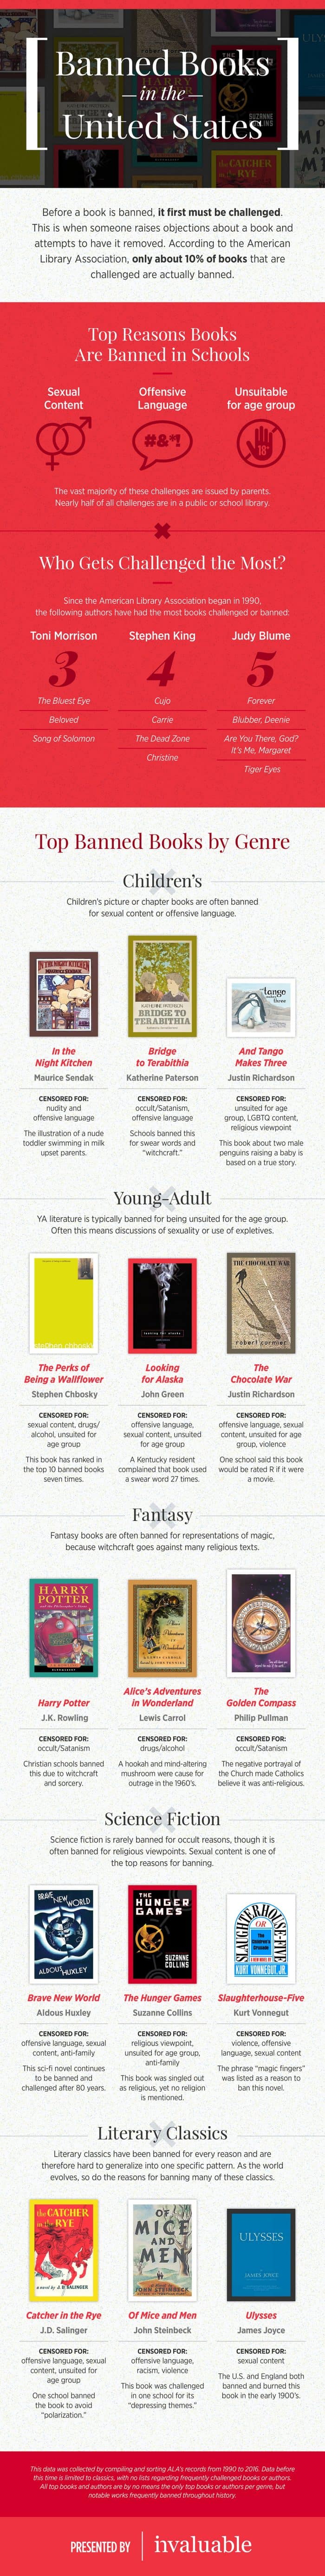 US banned books infographic